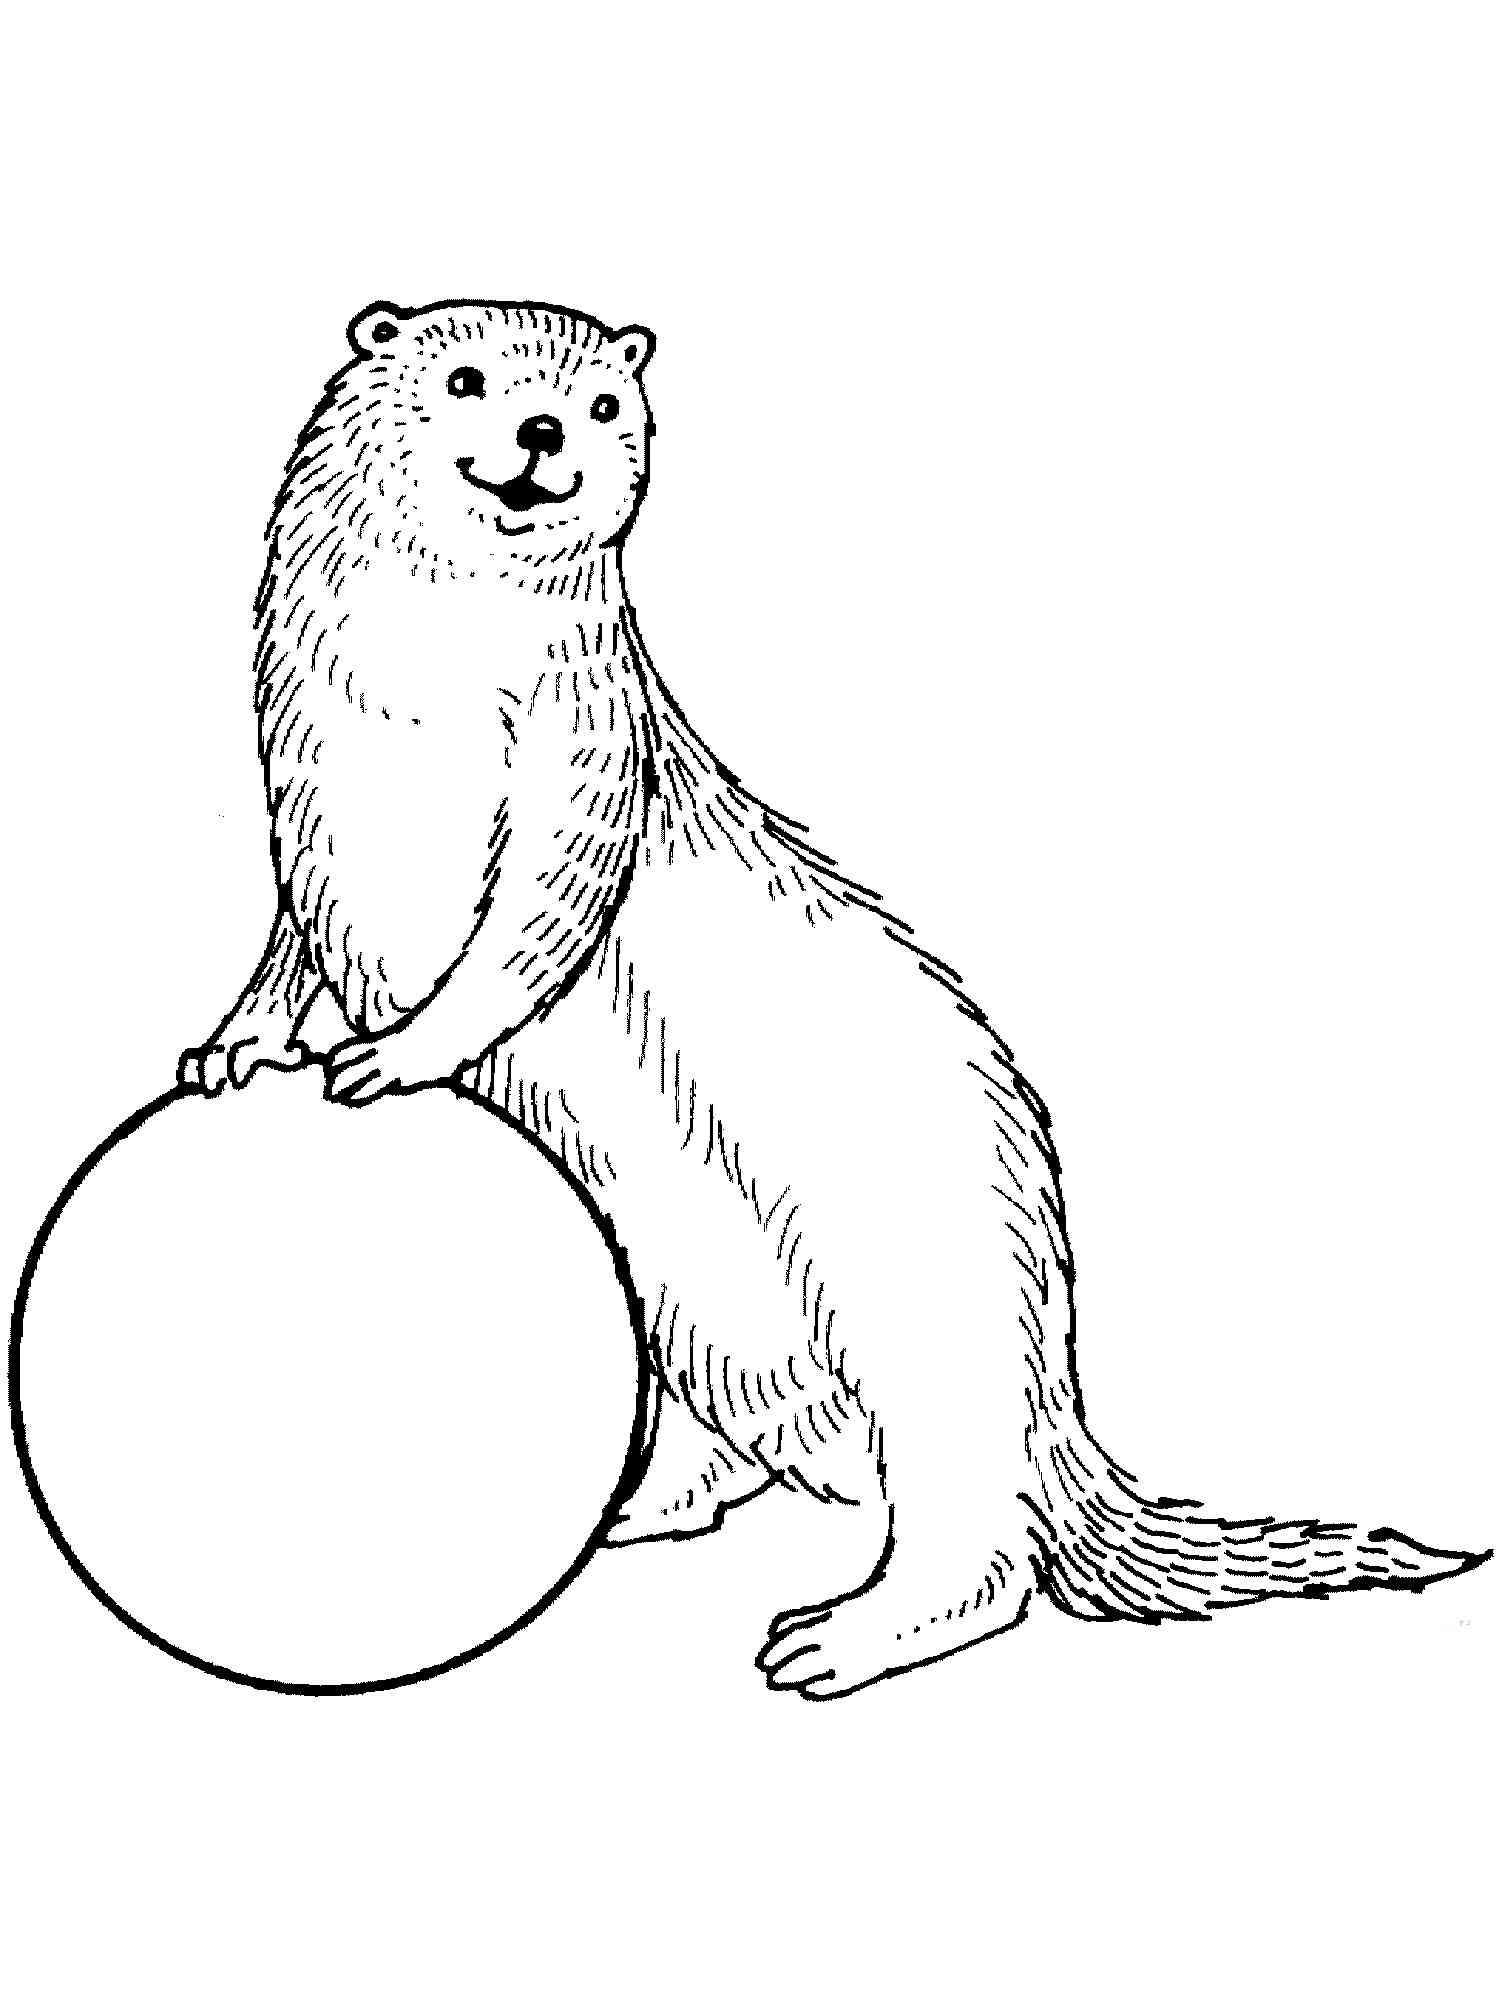 Free Otter coloring pages. Download and print Otter coloring pages